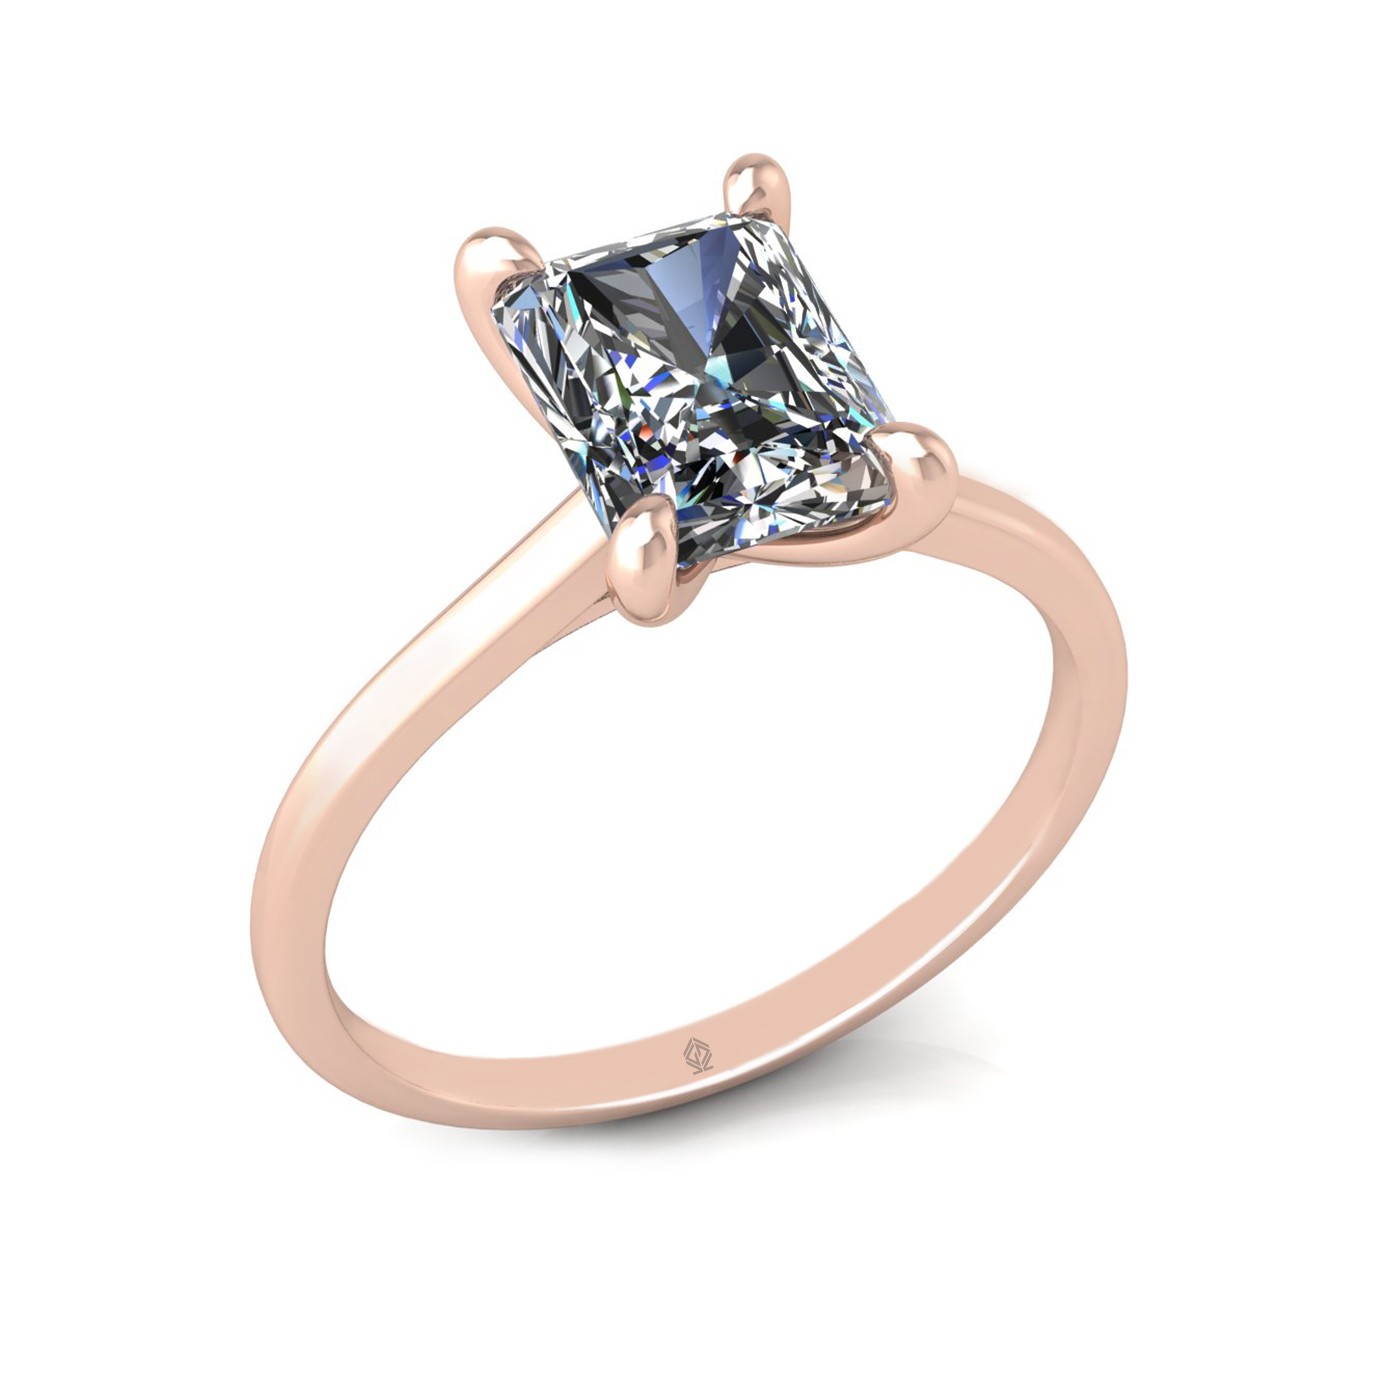 18k rose gold  2,00 ct 4 prongs solitaire radiant cut diamond engagement ring with whisper thin band